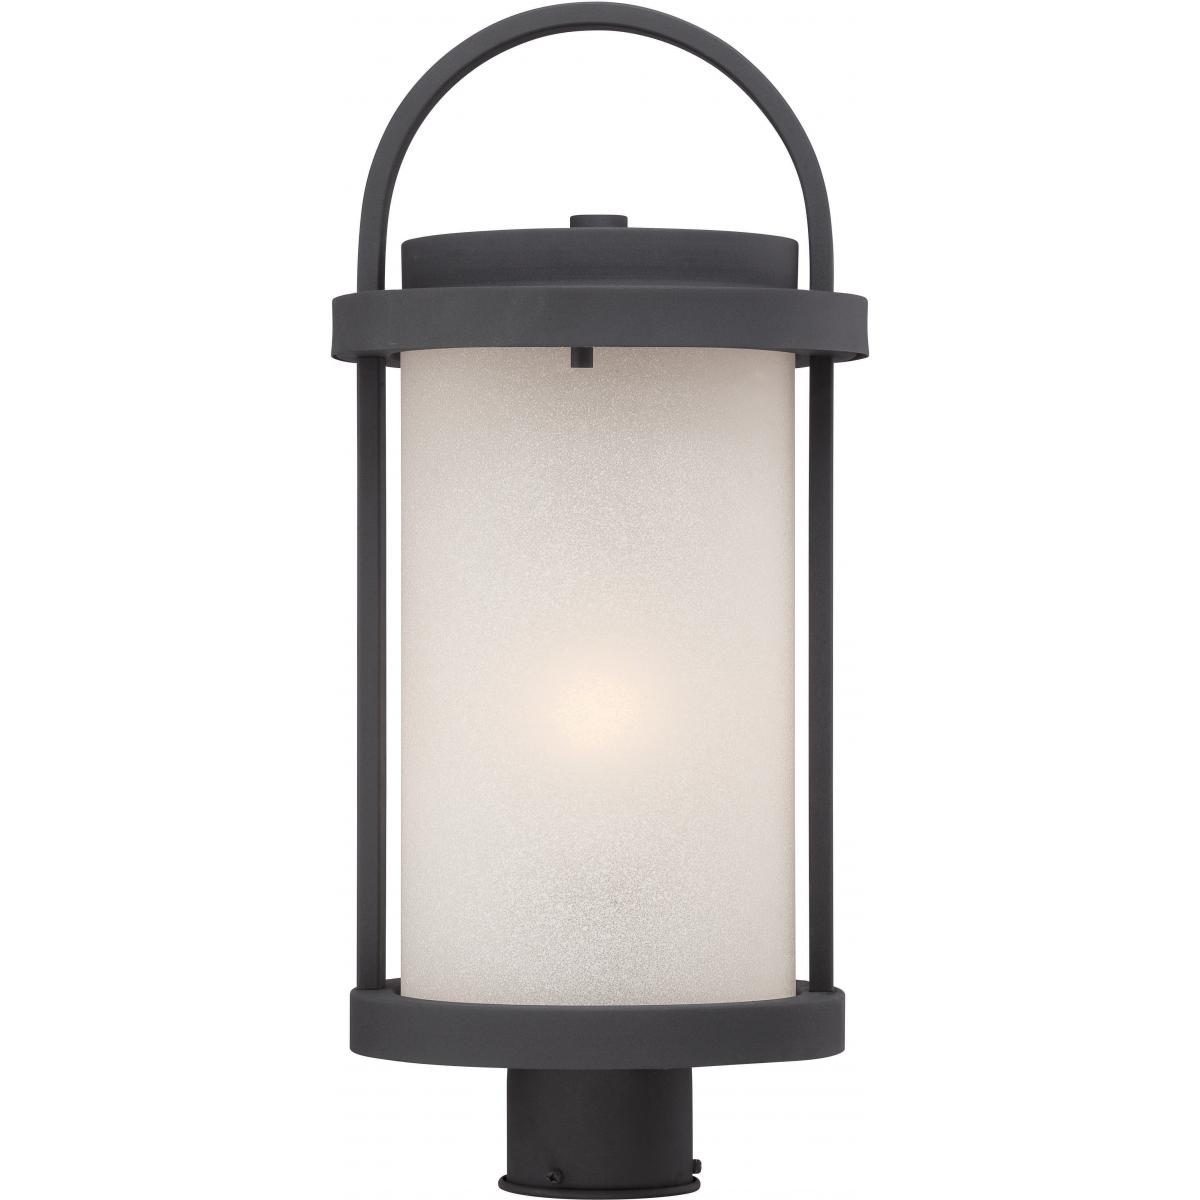 62-654 WILLIS LED OUTDOOR POST